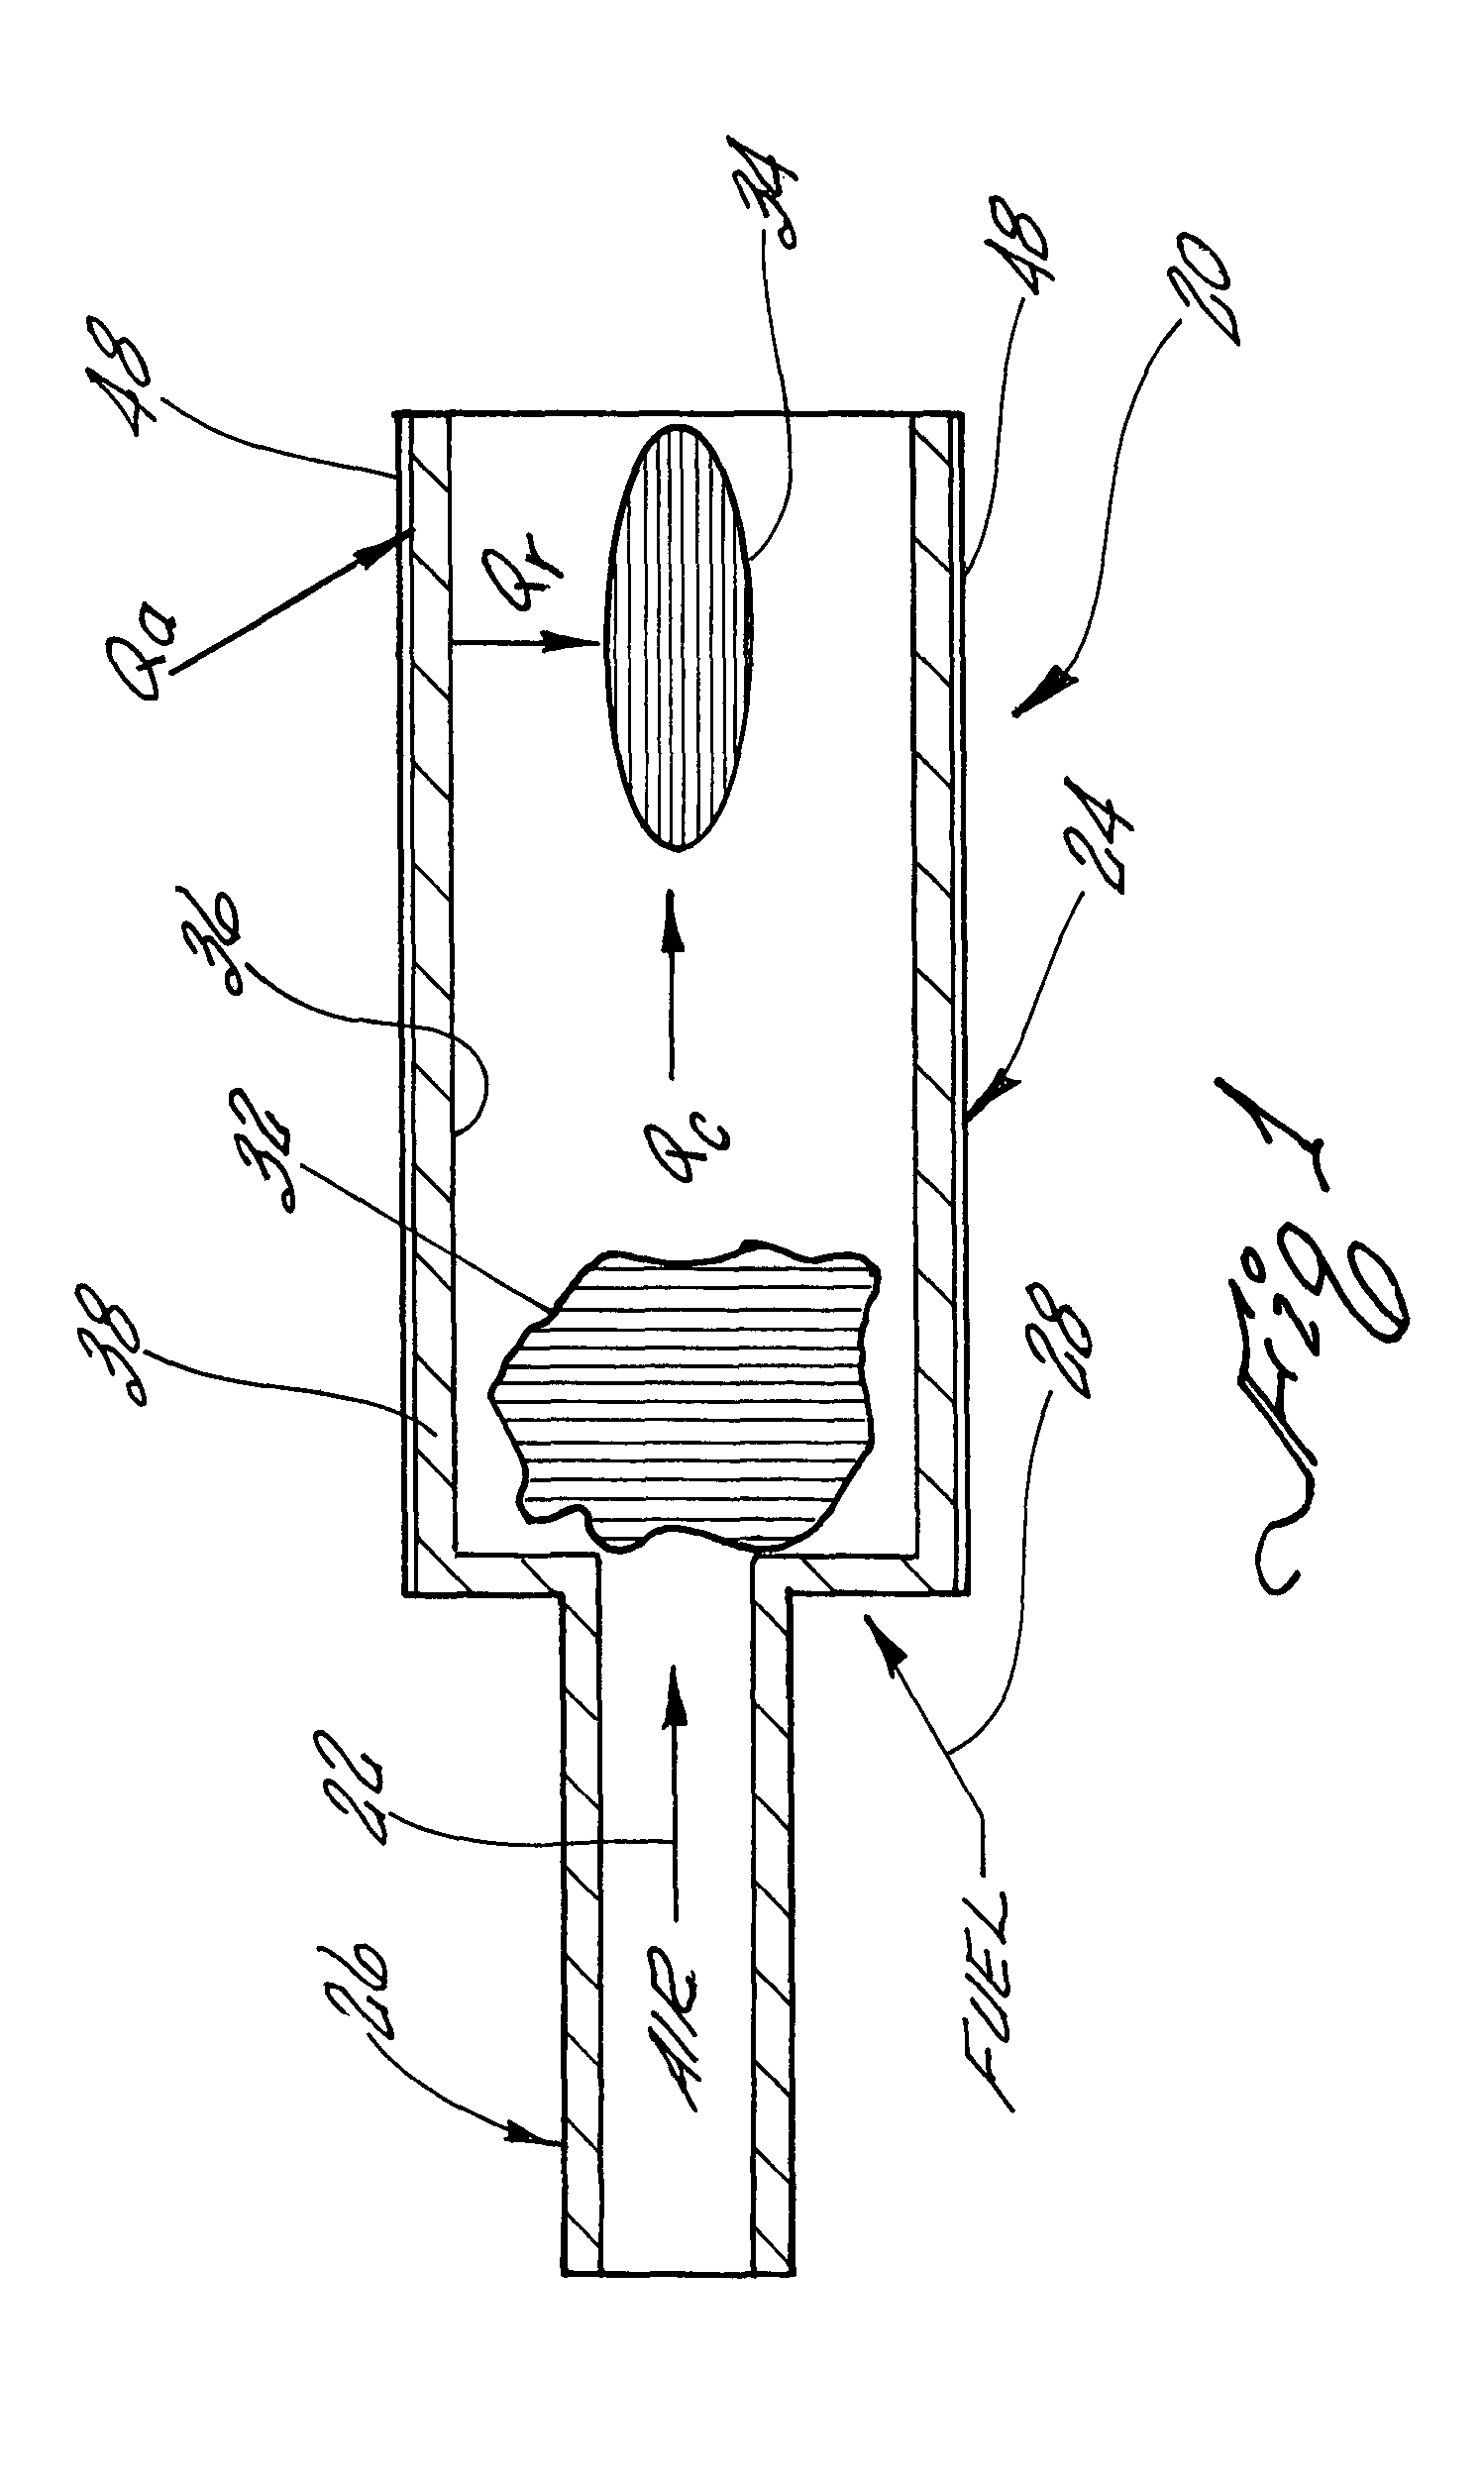 Combustion device to provide a controlled heat flux environment